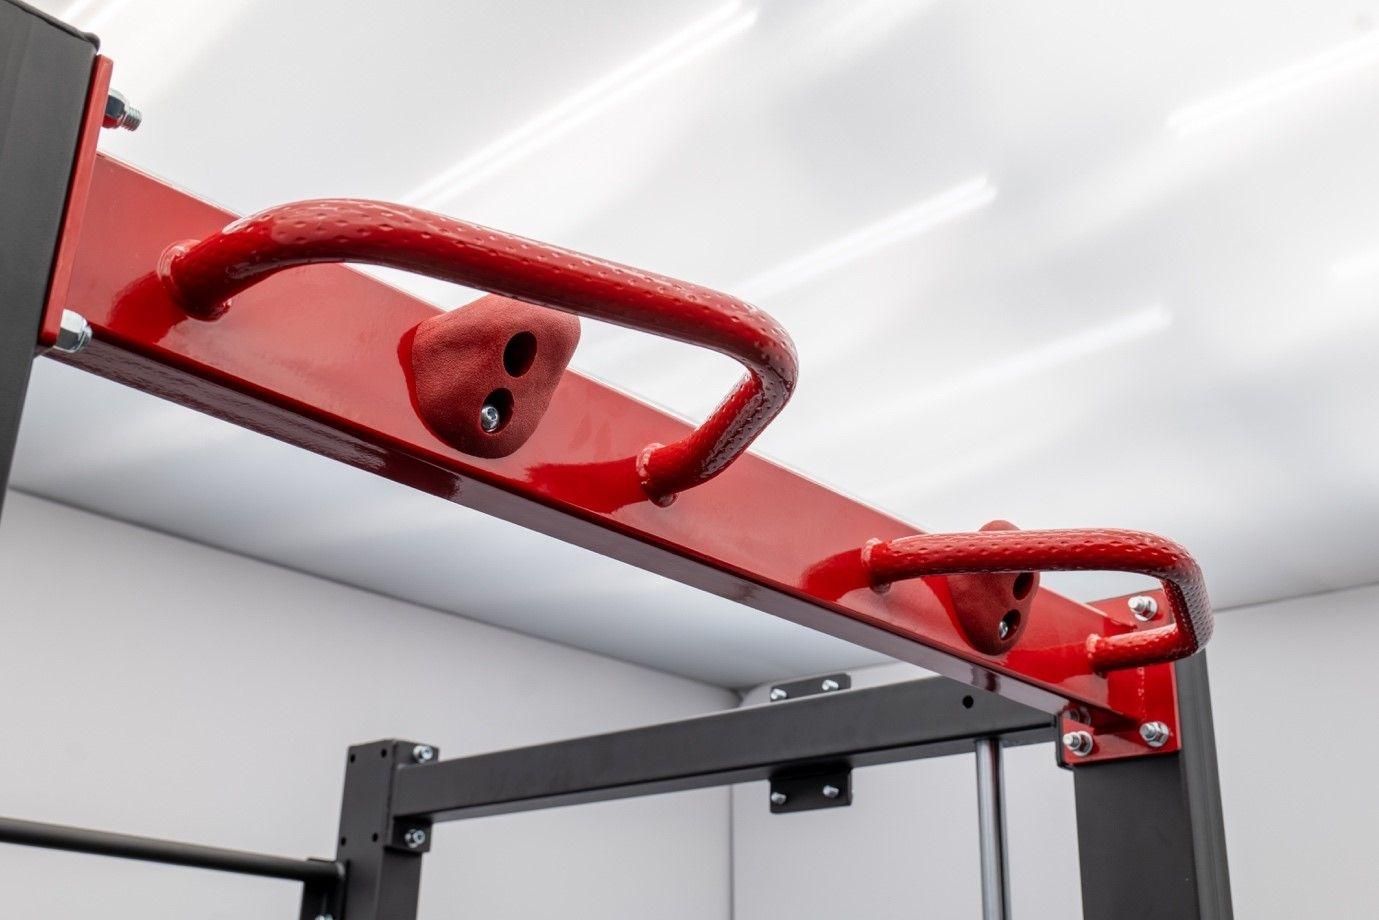 Extended overhanging pull-up bar with rock climbing grips